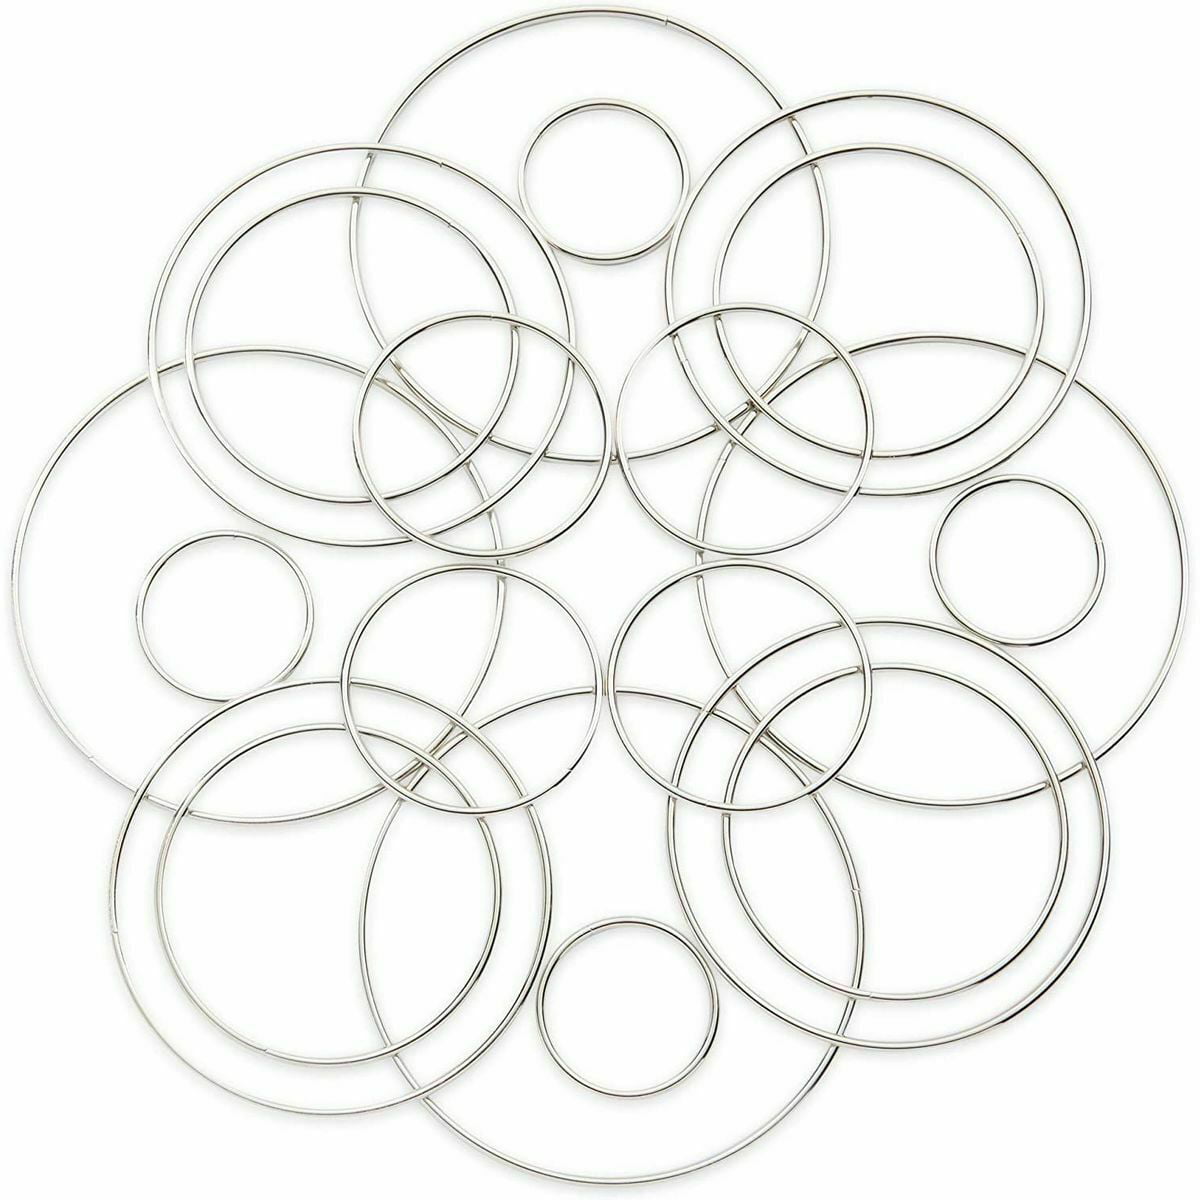 Silver Metal Rings for Crafts, Macrame, and Crochet (5 Sizes, 20 Pack)